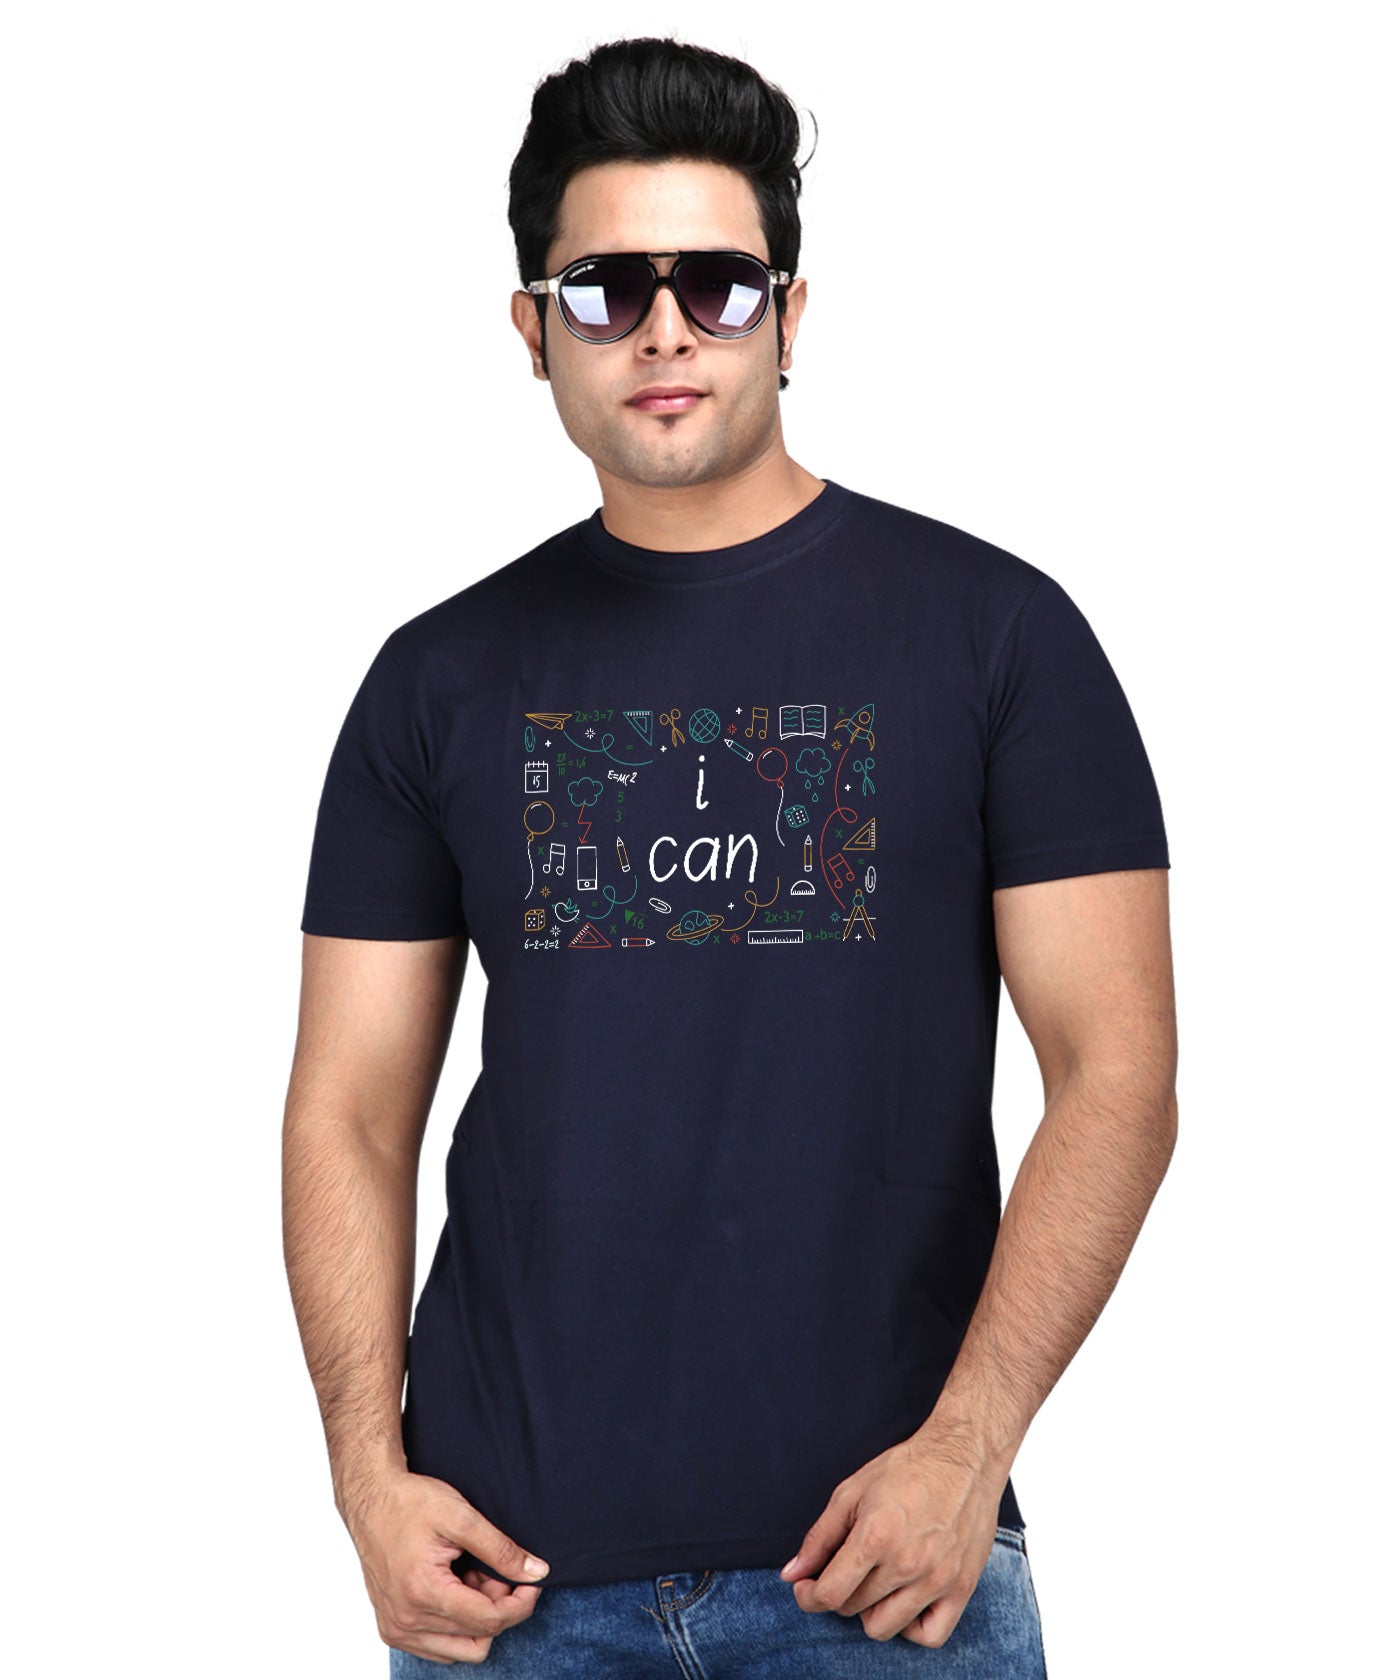 I Can - Premium Round Neck Cotton Tees for Men - Navy Blue